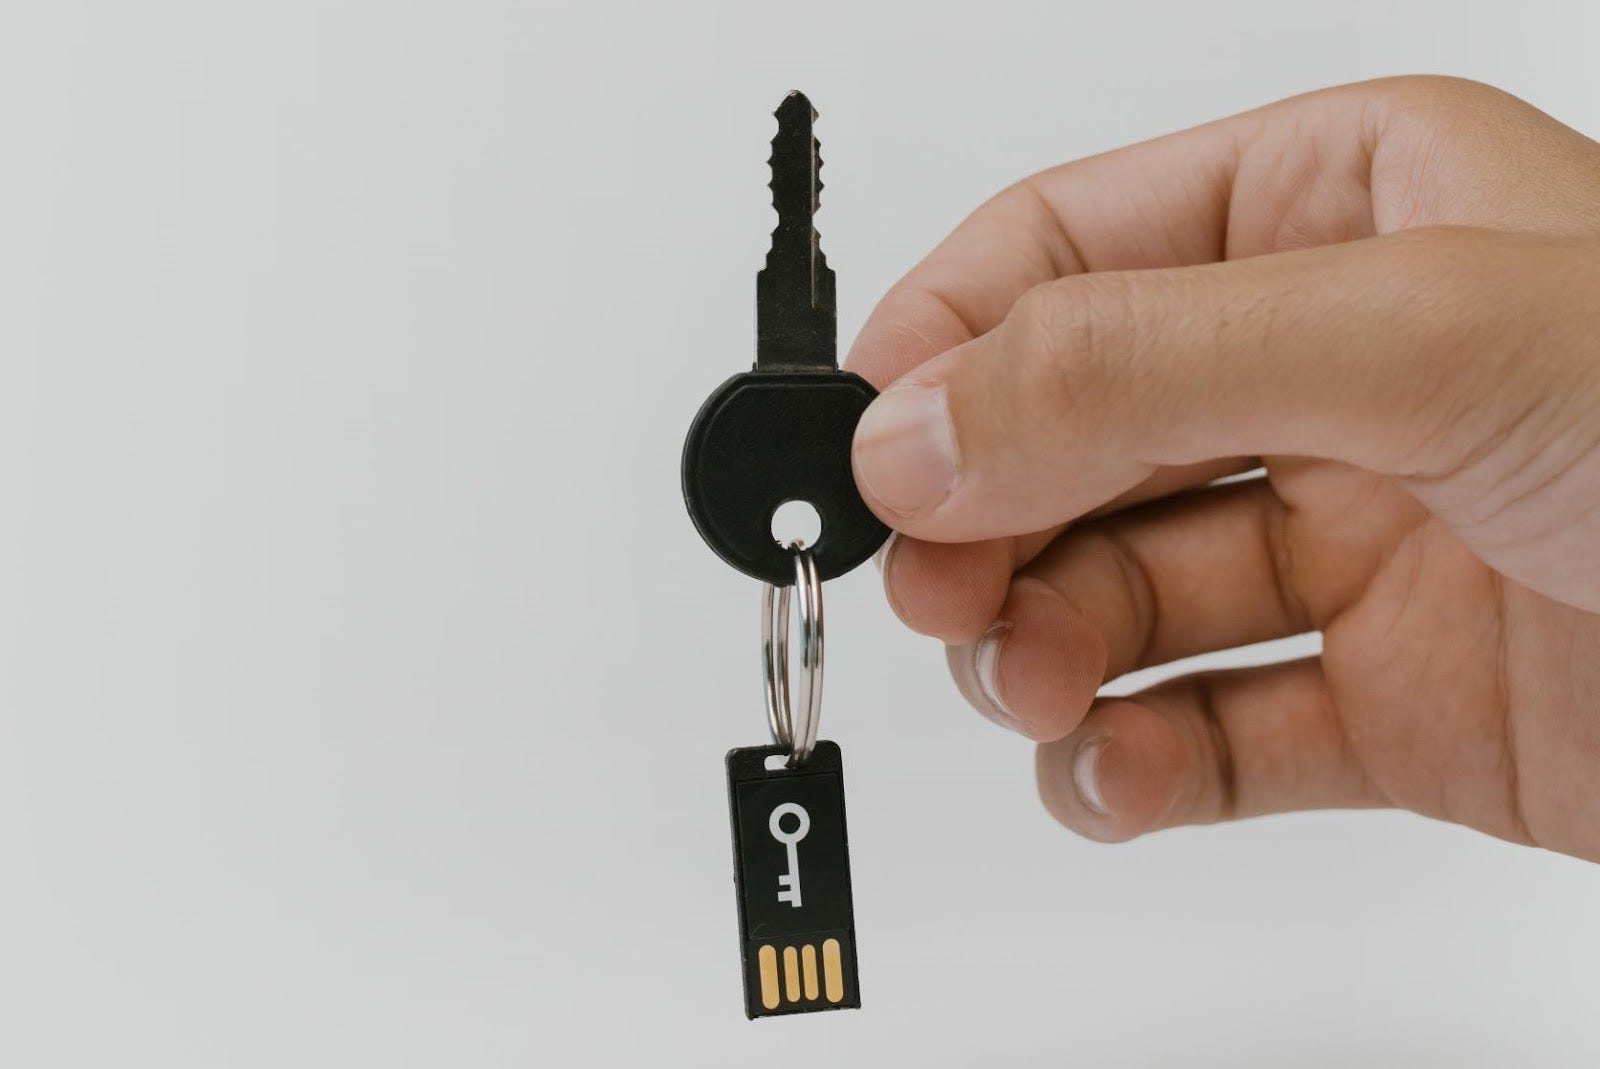 Private keys are unique to you and must be kept completely private.